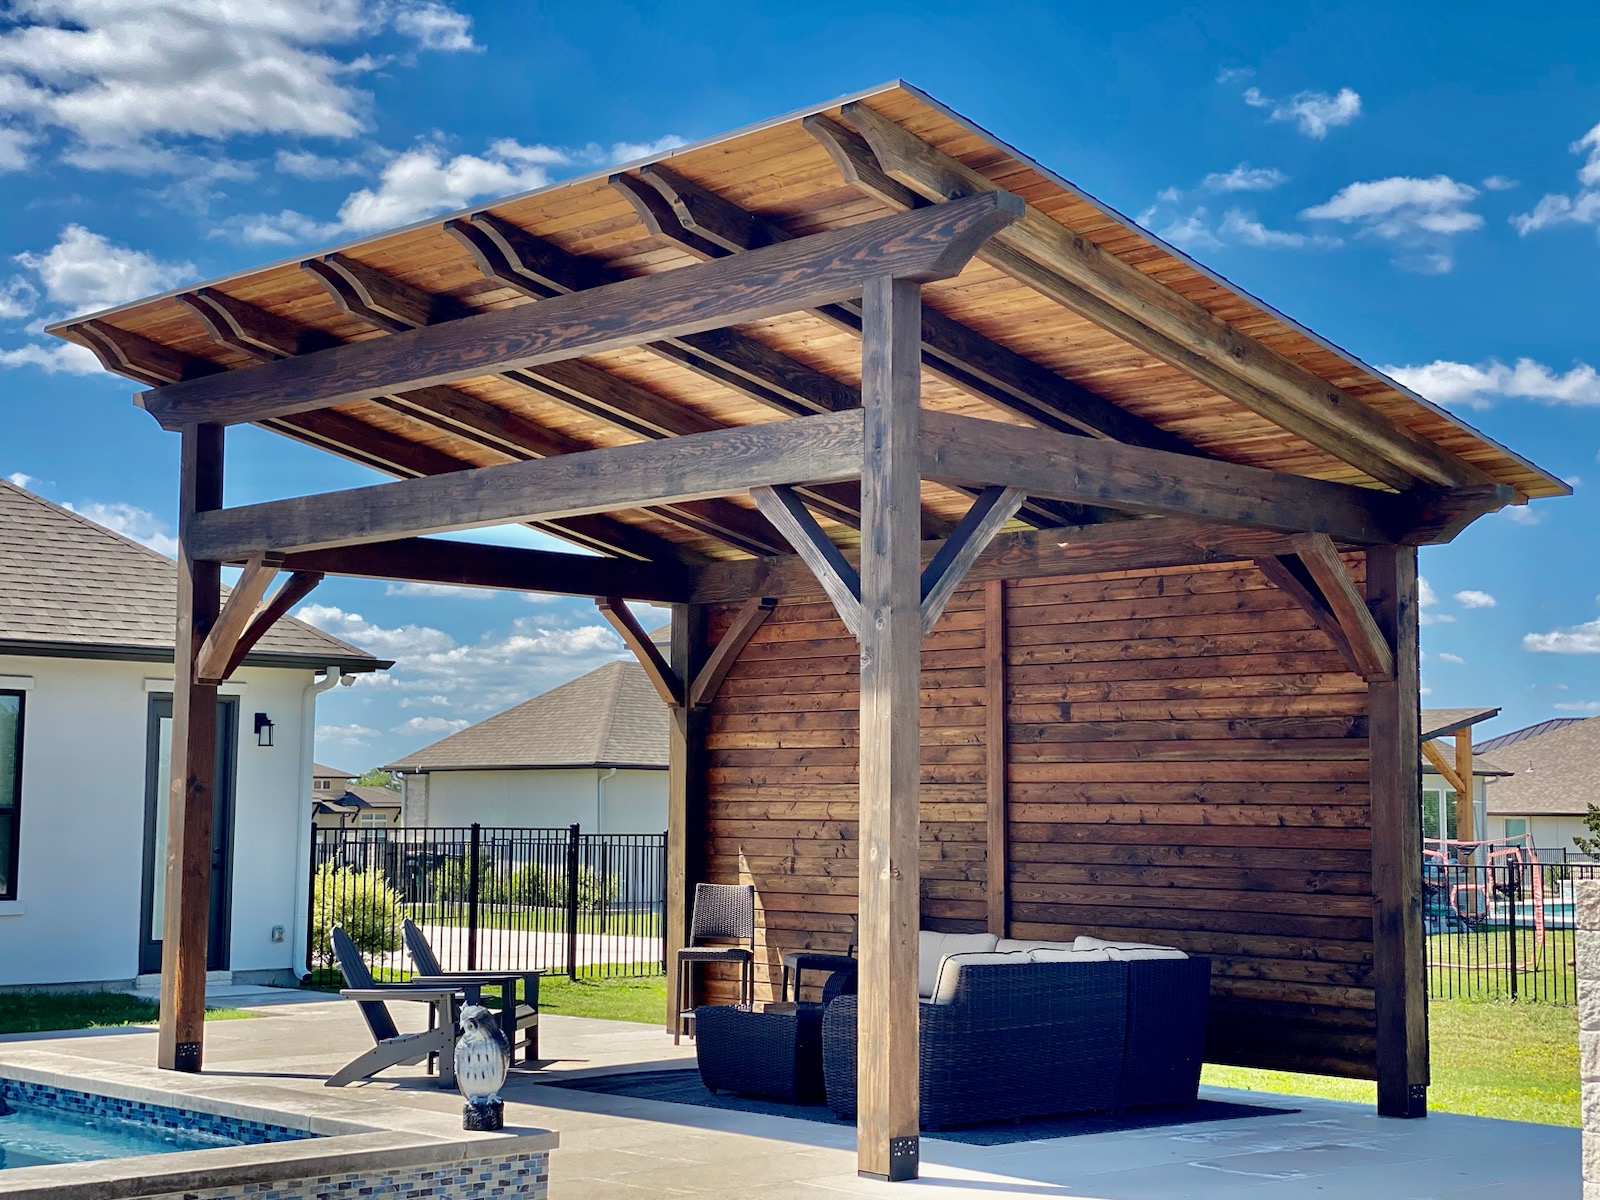 San Antonio, 16 x 20, heavy timbers, shingle roof, douglas fir, denali, double rafters, relaxing, poolside or swimming pool, cabana, private, shade structure, patio furniture, wood pavilion, pavilion kit